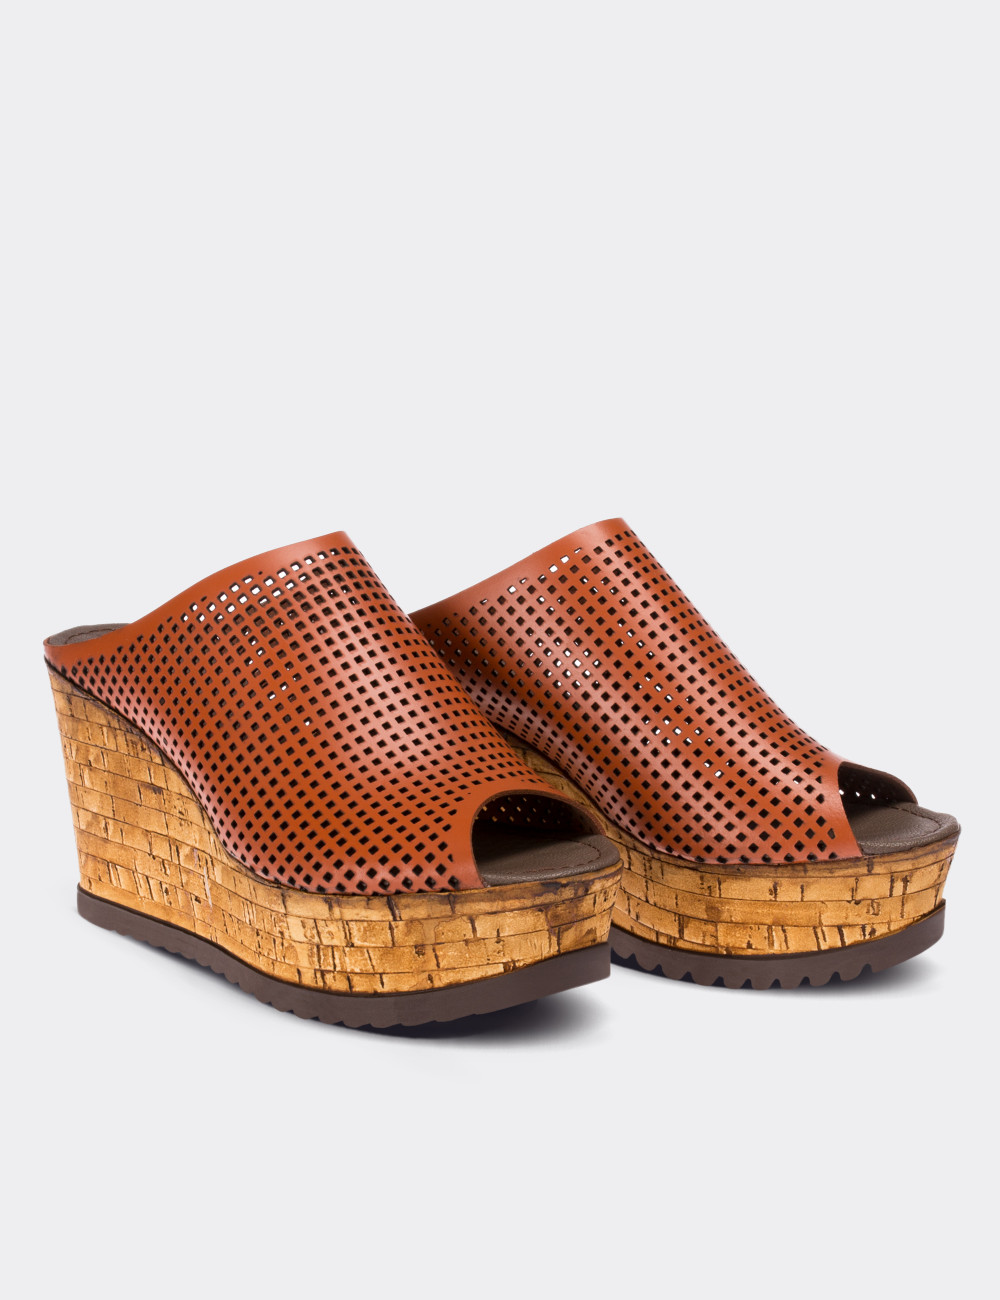 Tan  Leather Wedge Sandals - 02012ZTBAP01